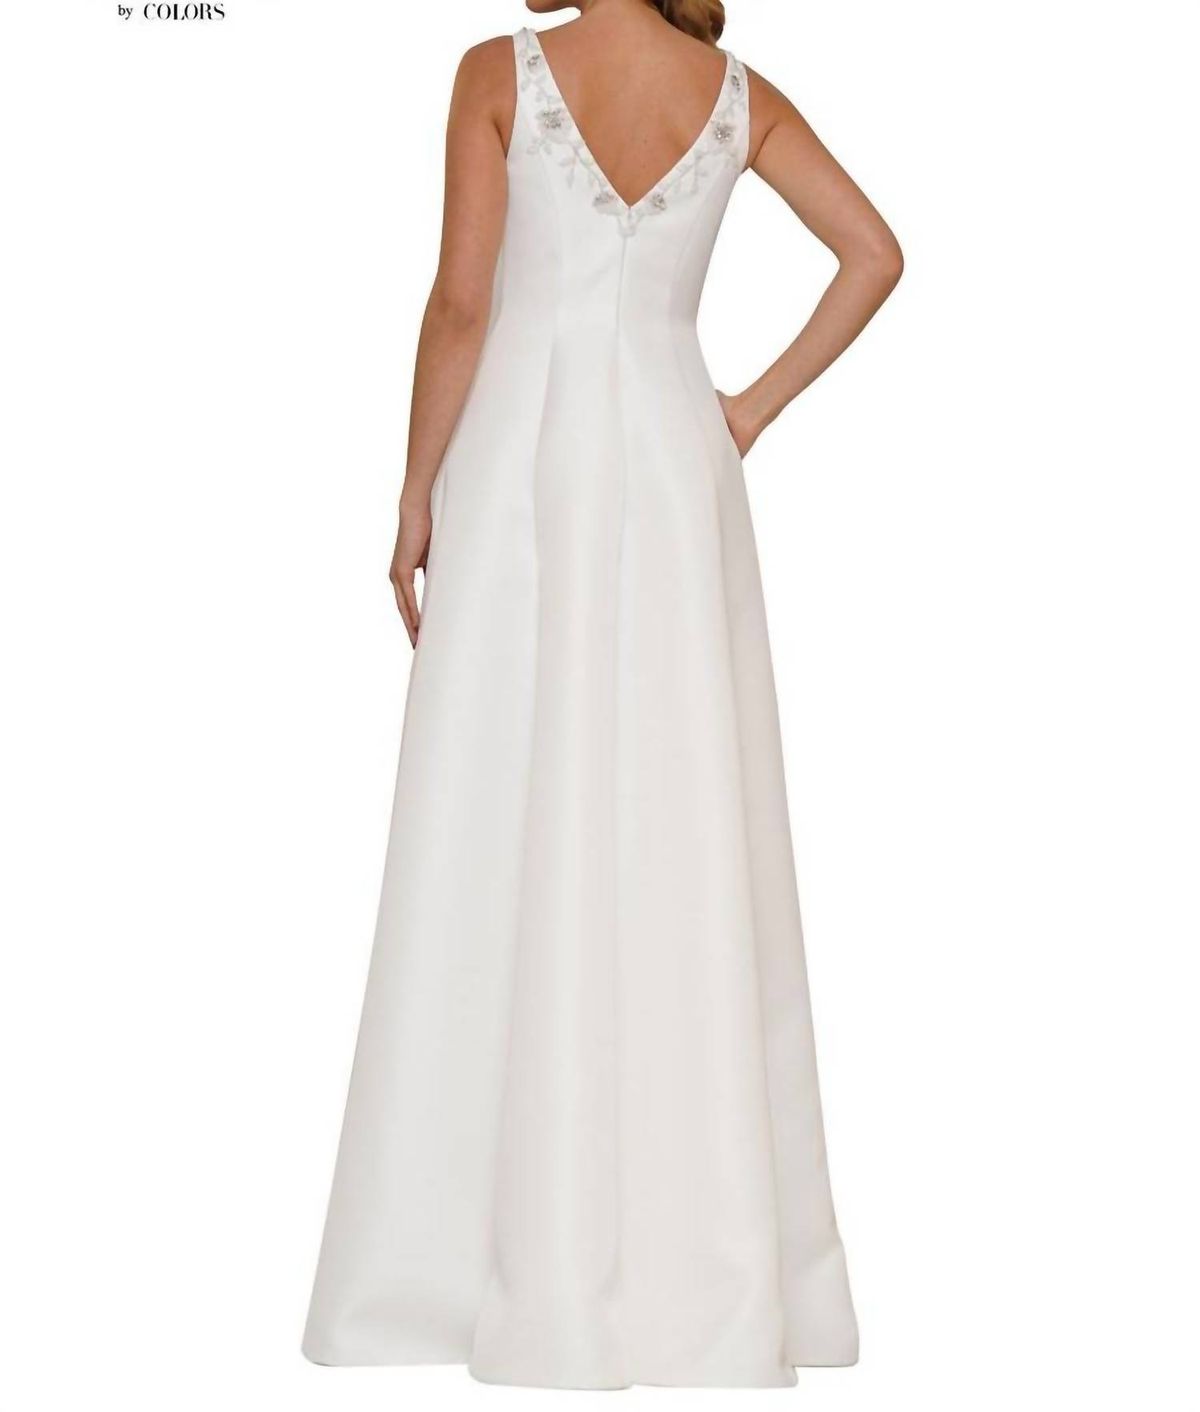 Style 1-517732870-1901 Marsoni by Colors Size 6 Prom White A-line Dress on Queenly